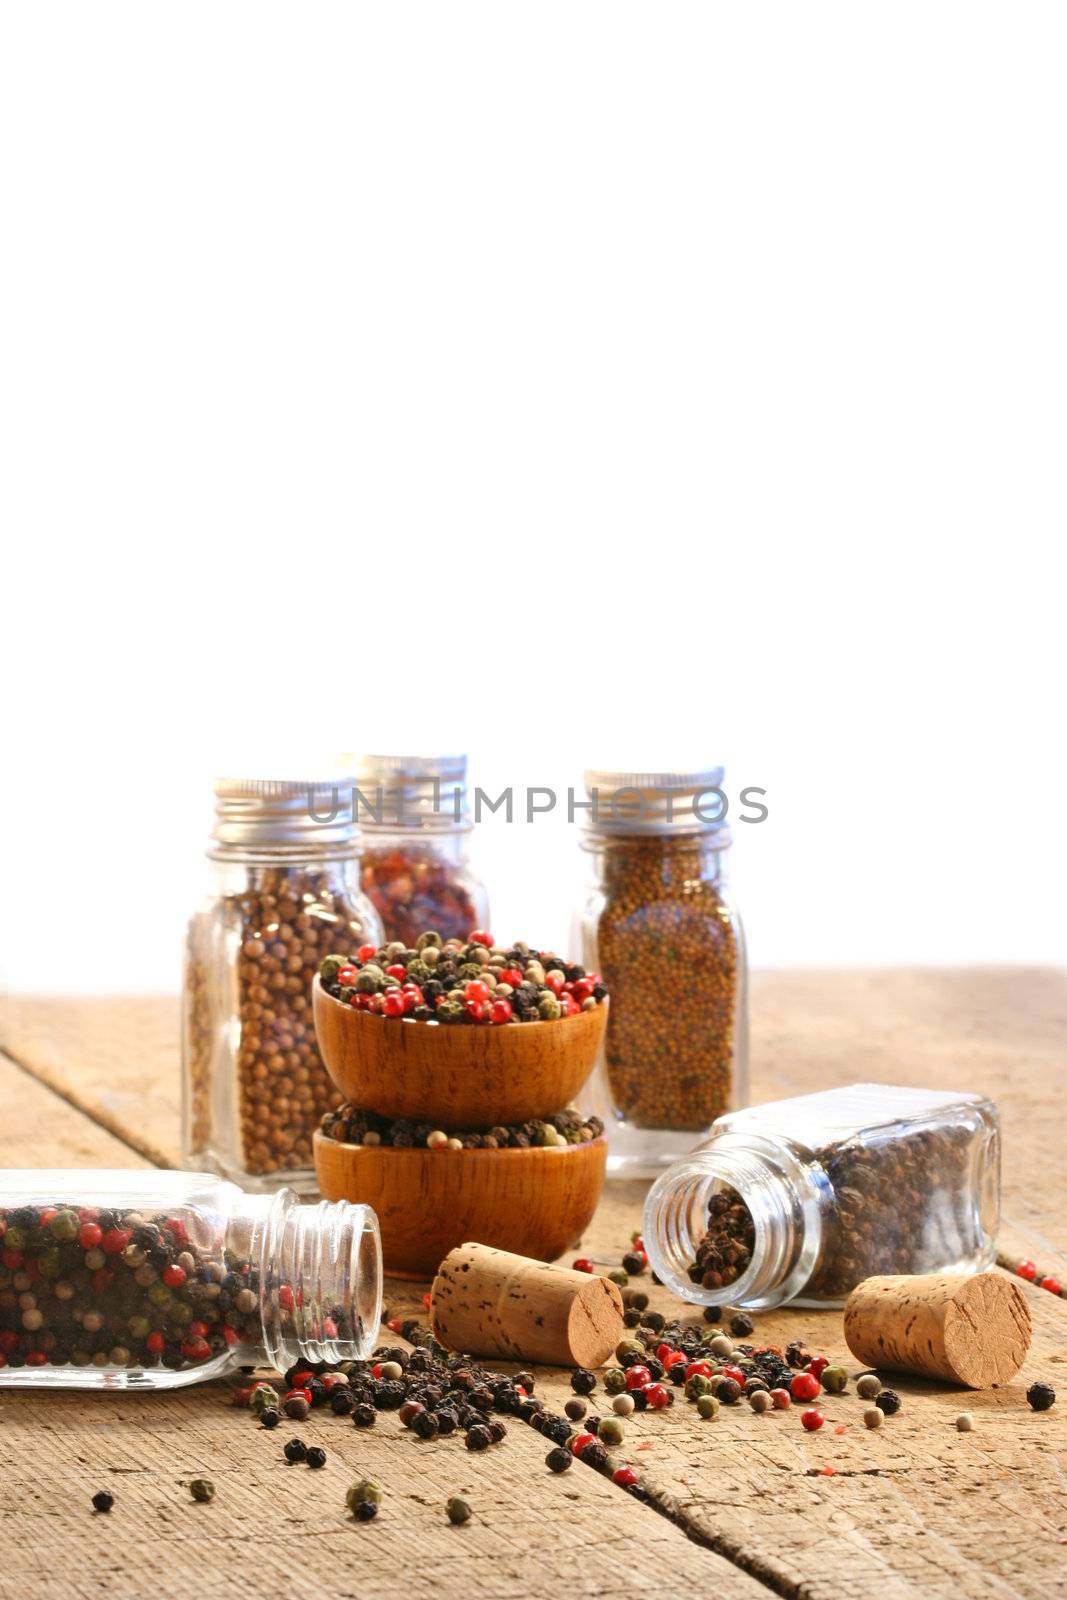 Spice bottles on rustic table by Sandralise